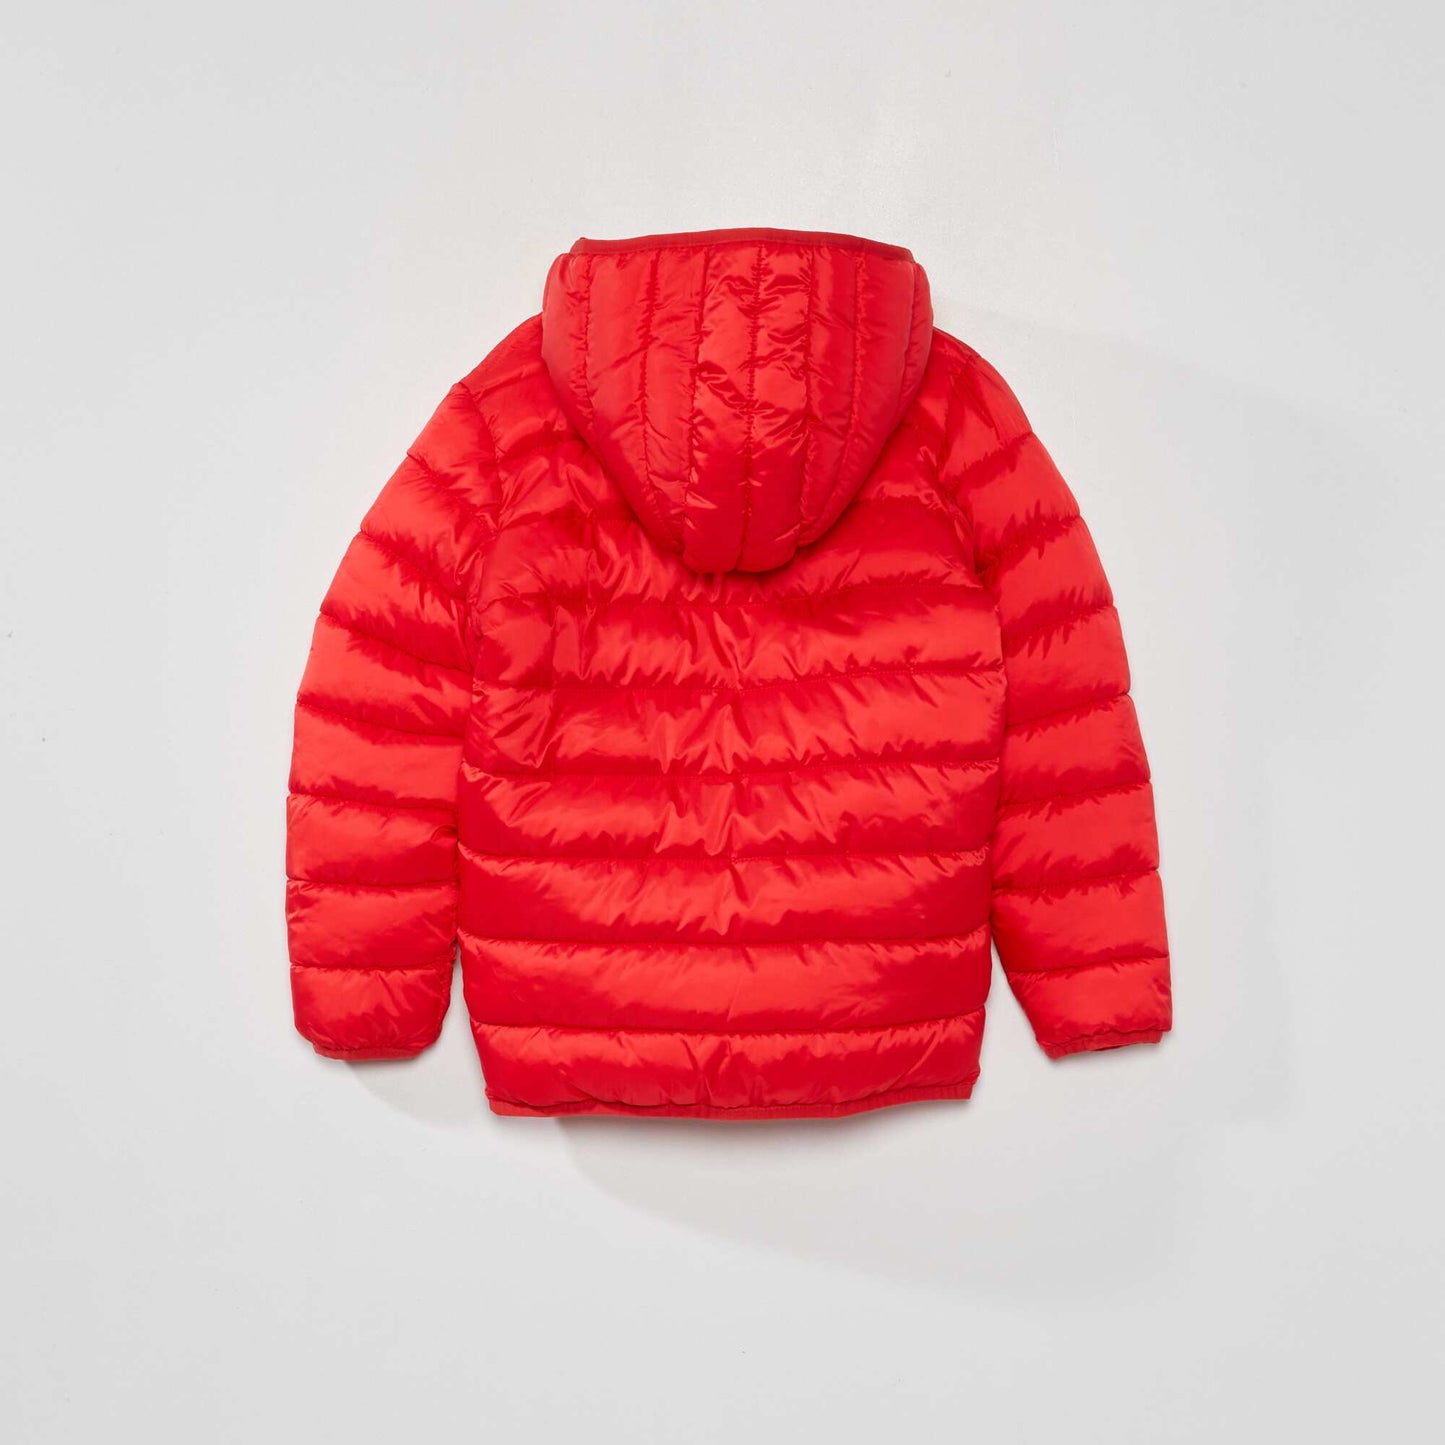 Padded jacket made from recycled bottles TRUE RED